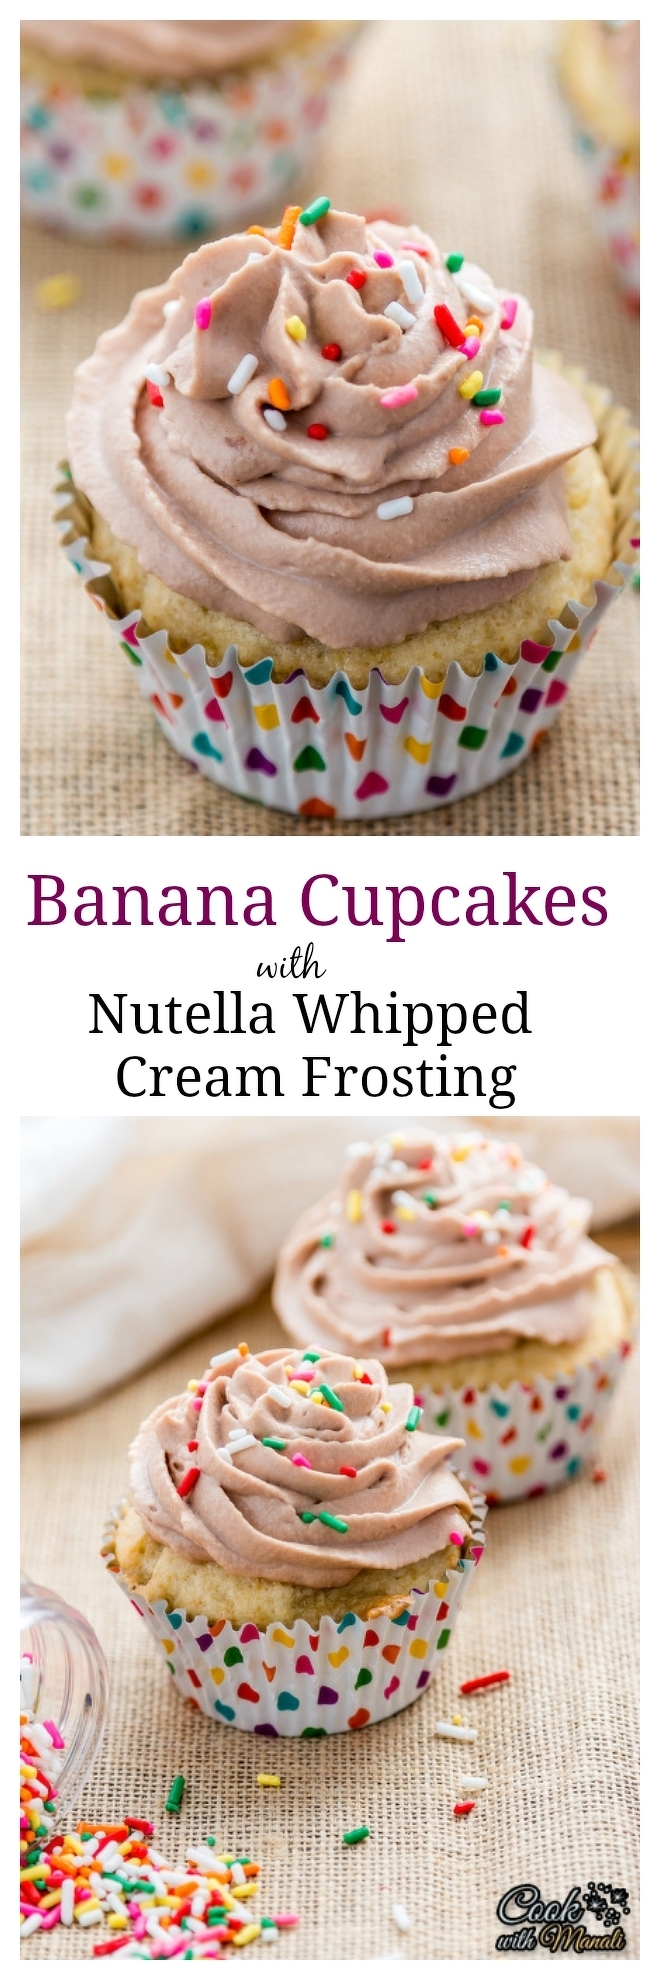 Banana-Cupcakes-With-Nutella-Whipped-Cream-Frosting Collage-nocwm